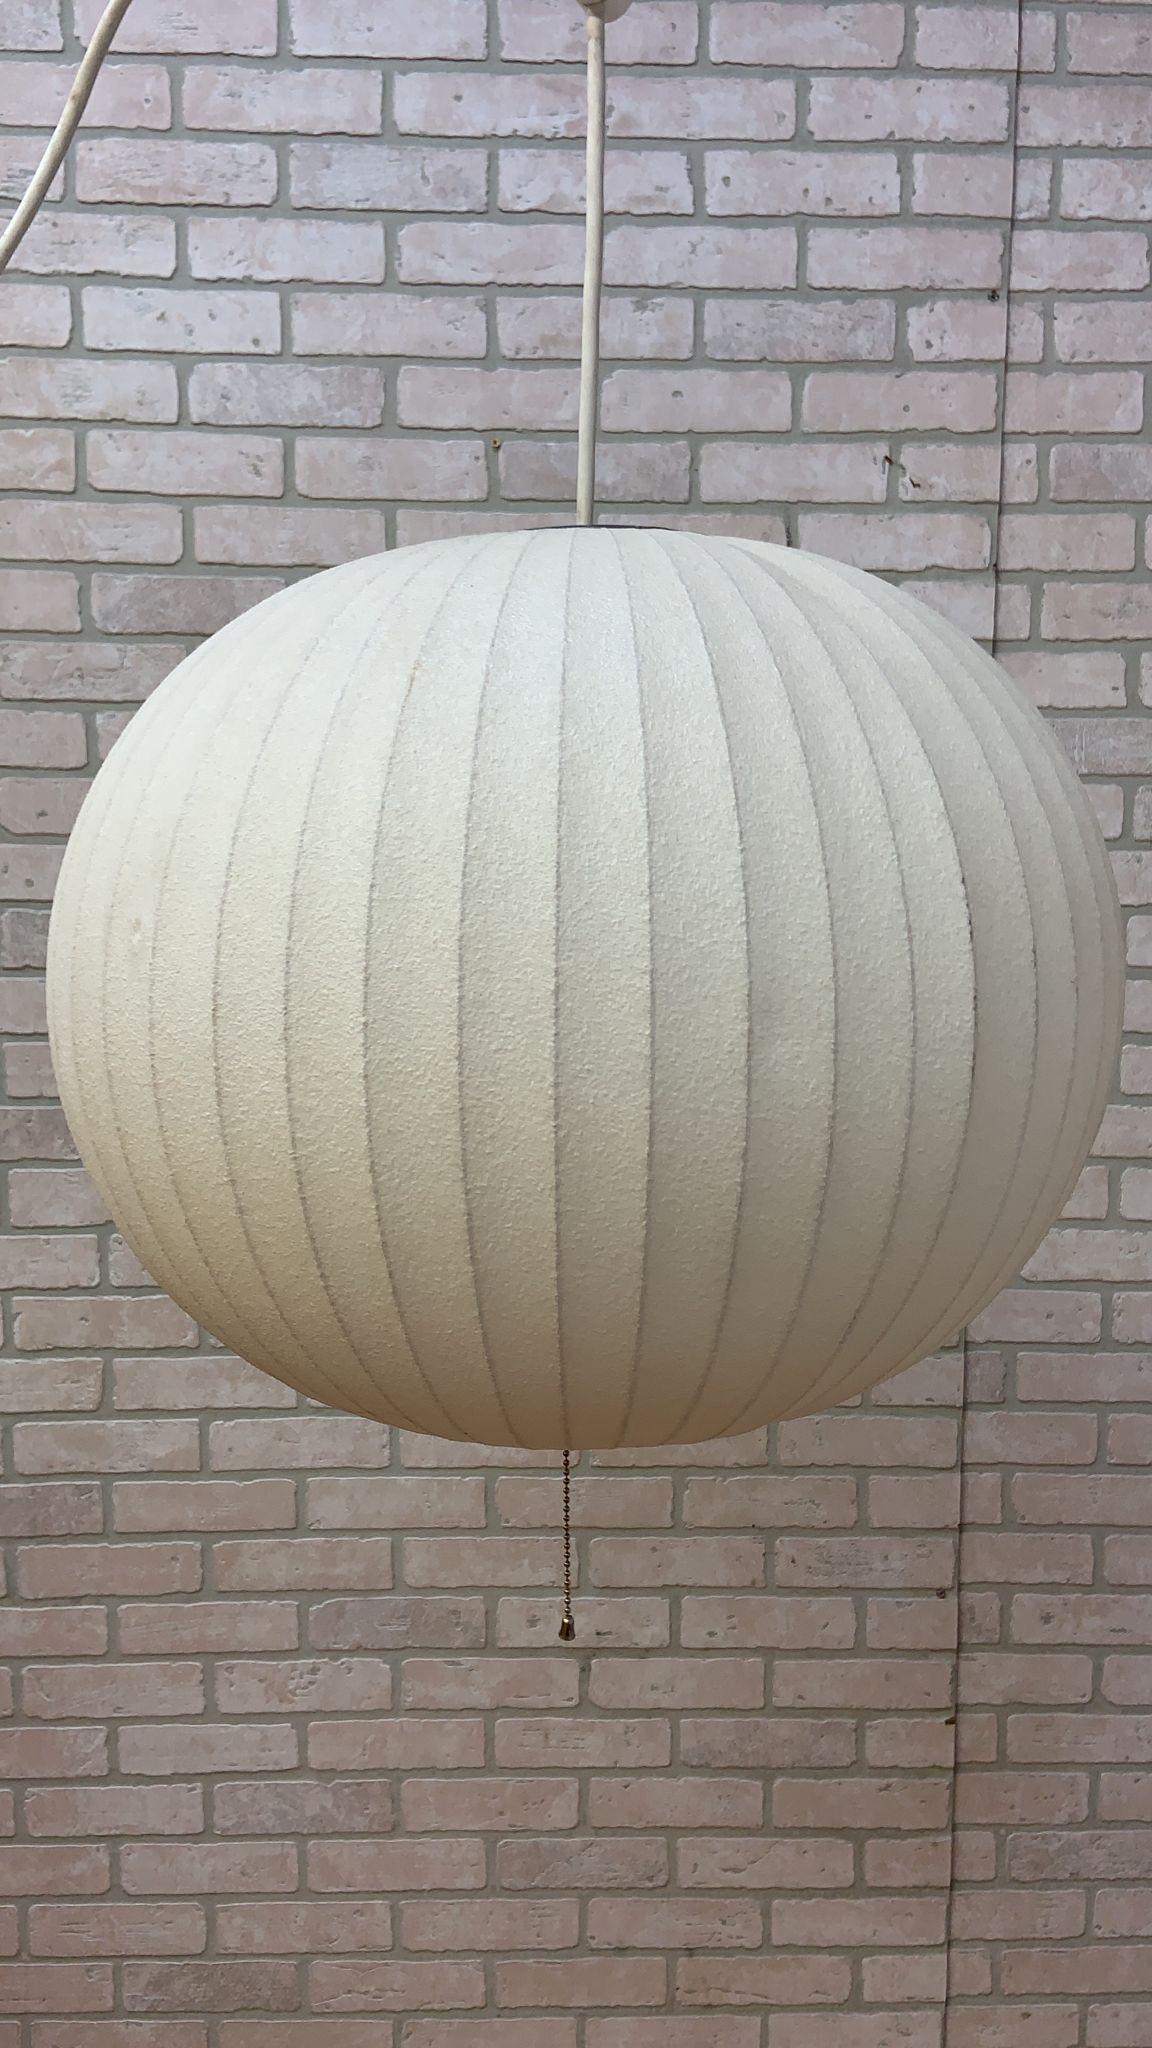 Vintage Mid Century Modern George Nelson Ball Pendant Bubble Lamp

This mid century modern George Nelson Bubble Lamp will add a touch of softness and luminosity to you interior. 

Circa 1970

Dimensions:
H 16”
W 18